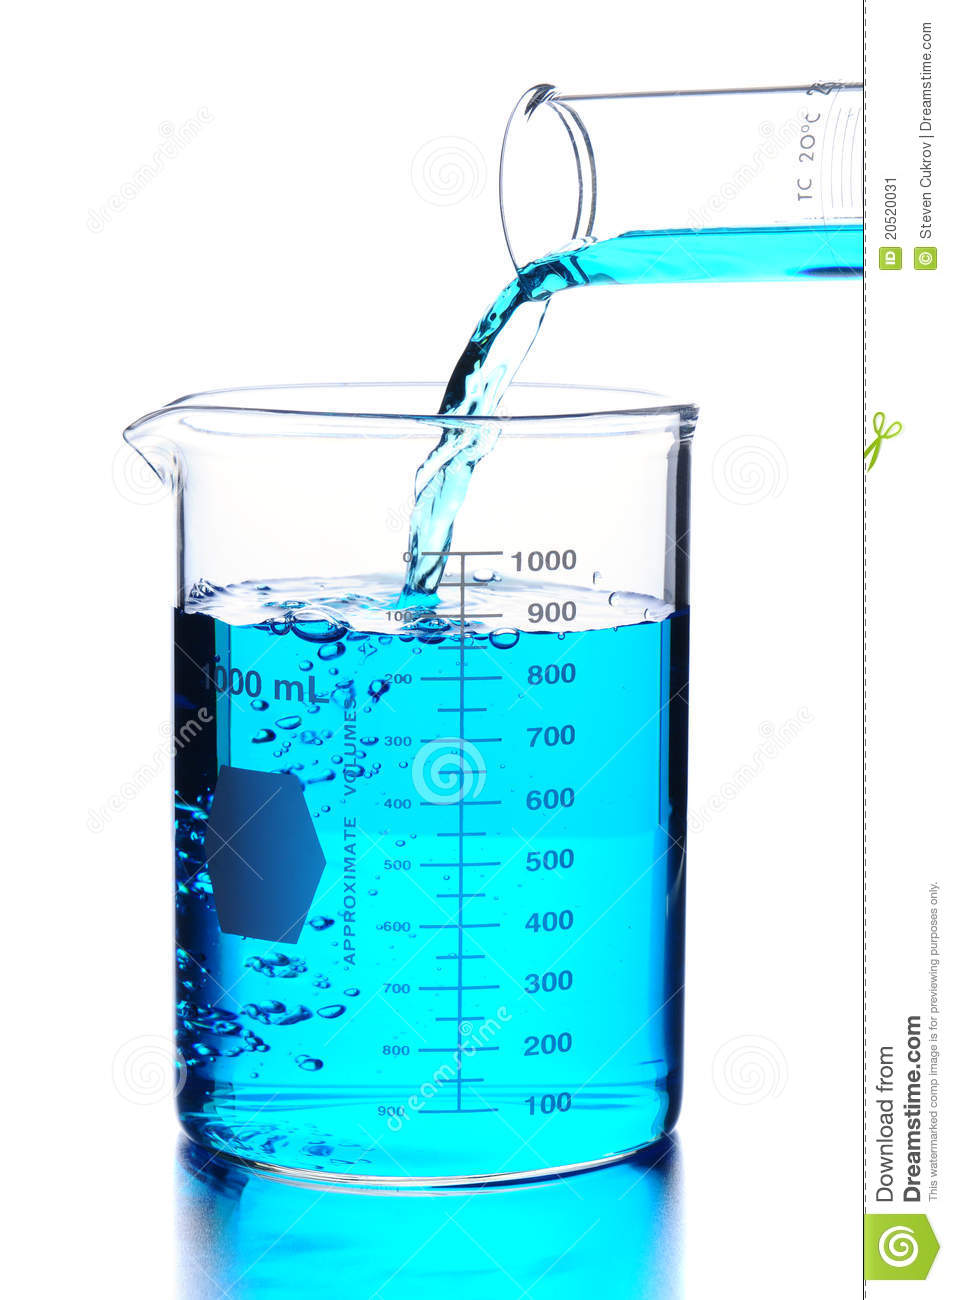 Liquid Pouring Into A Lab Beaker Stock Image   Image  20520031